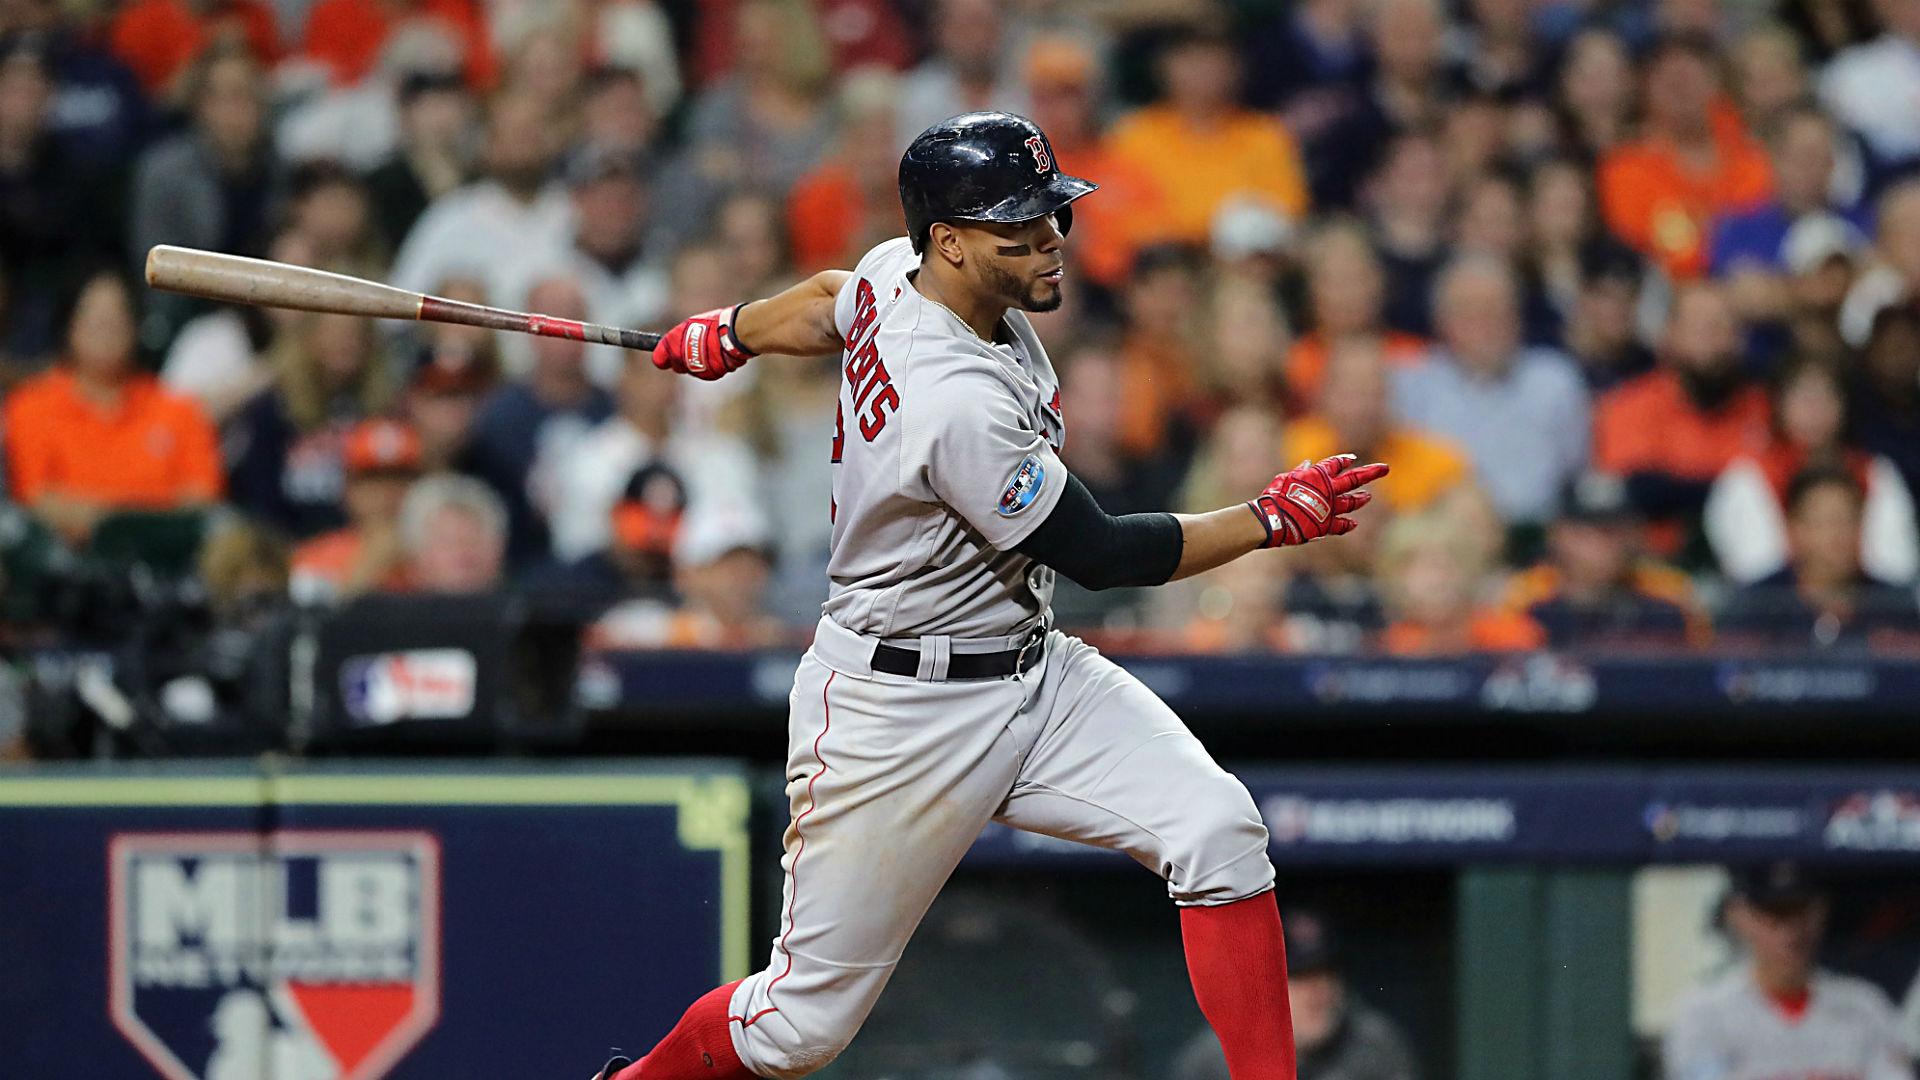 A Star Among Superstars What Makes Bogaerts the X Factor for the Padres   The Analyst